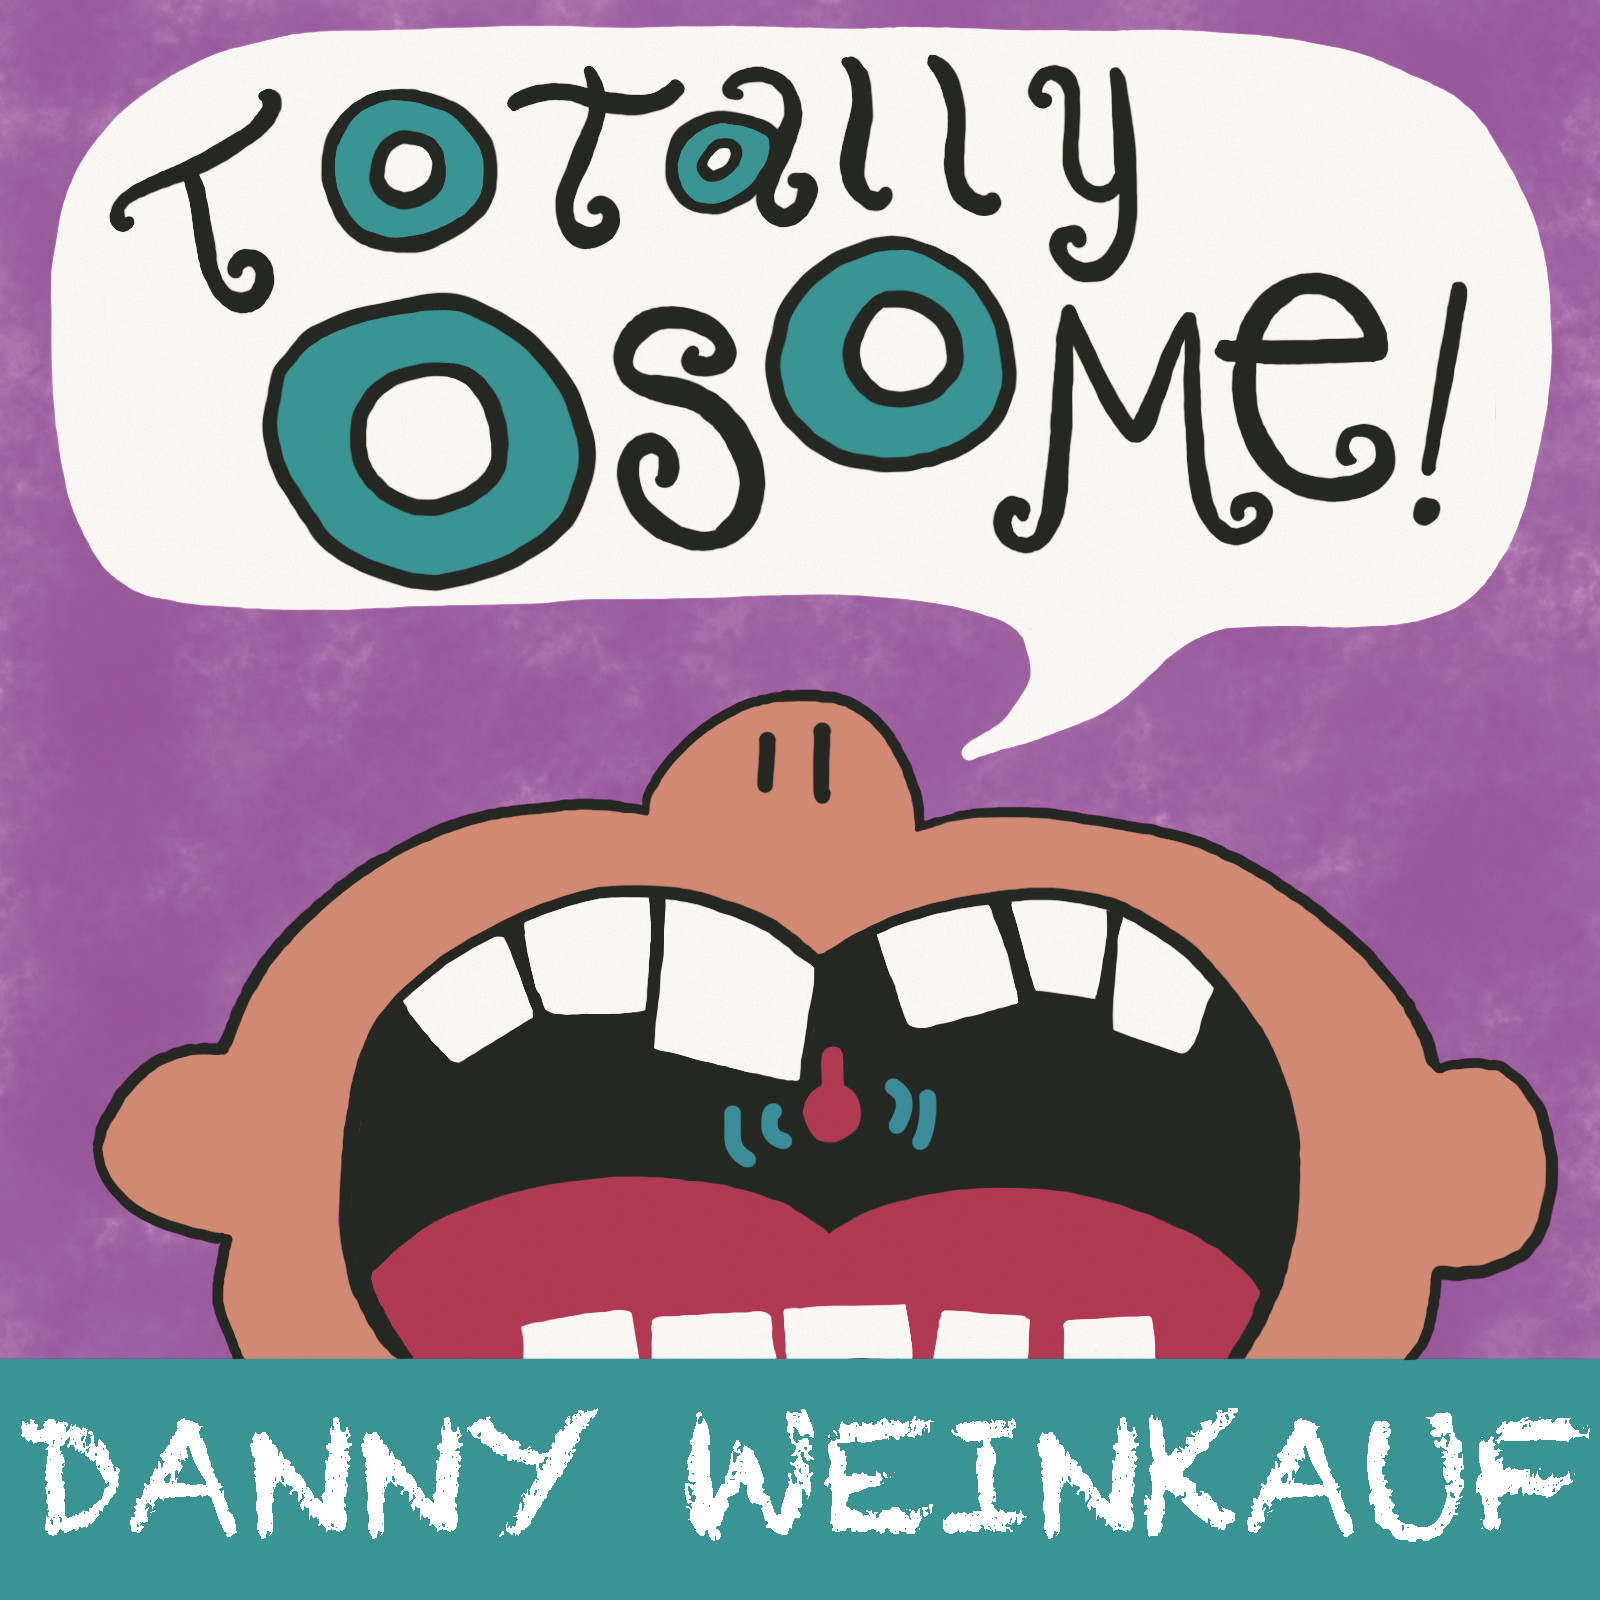 The album art for ‘Totally Osome!’ According to Weinkauf, the record’s name came about because of an inside joke.